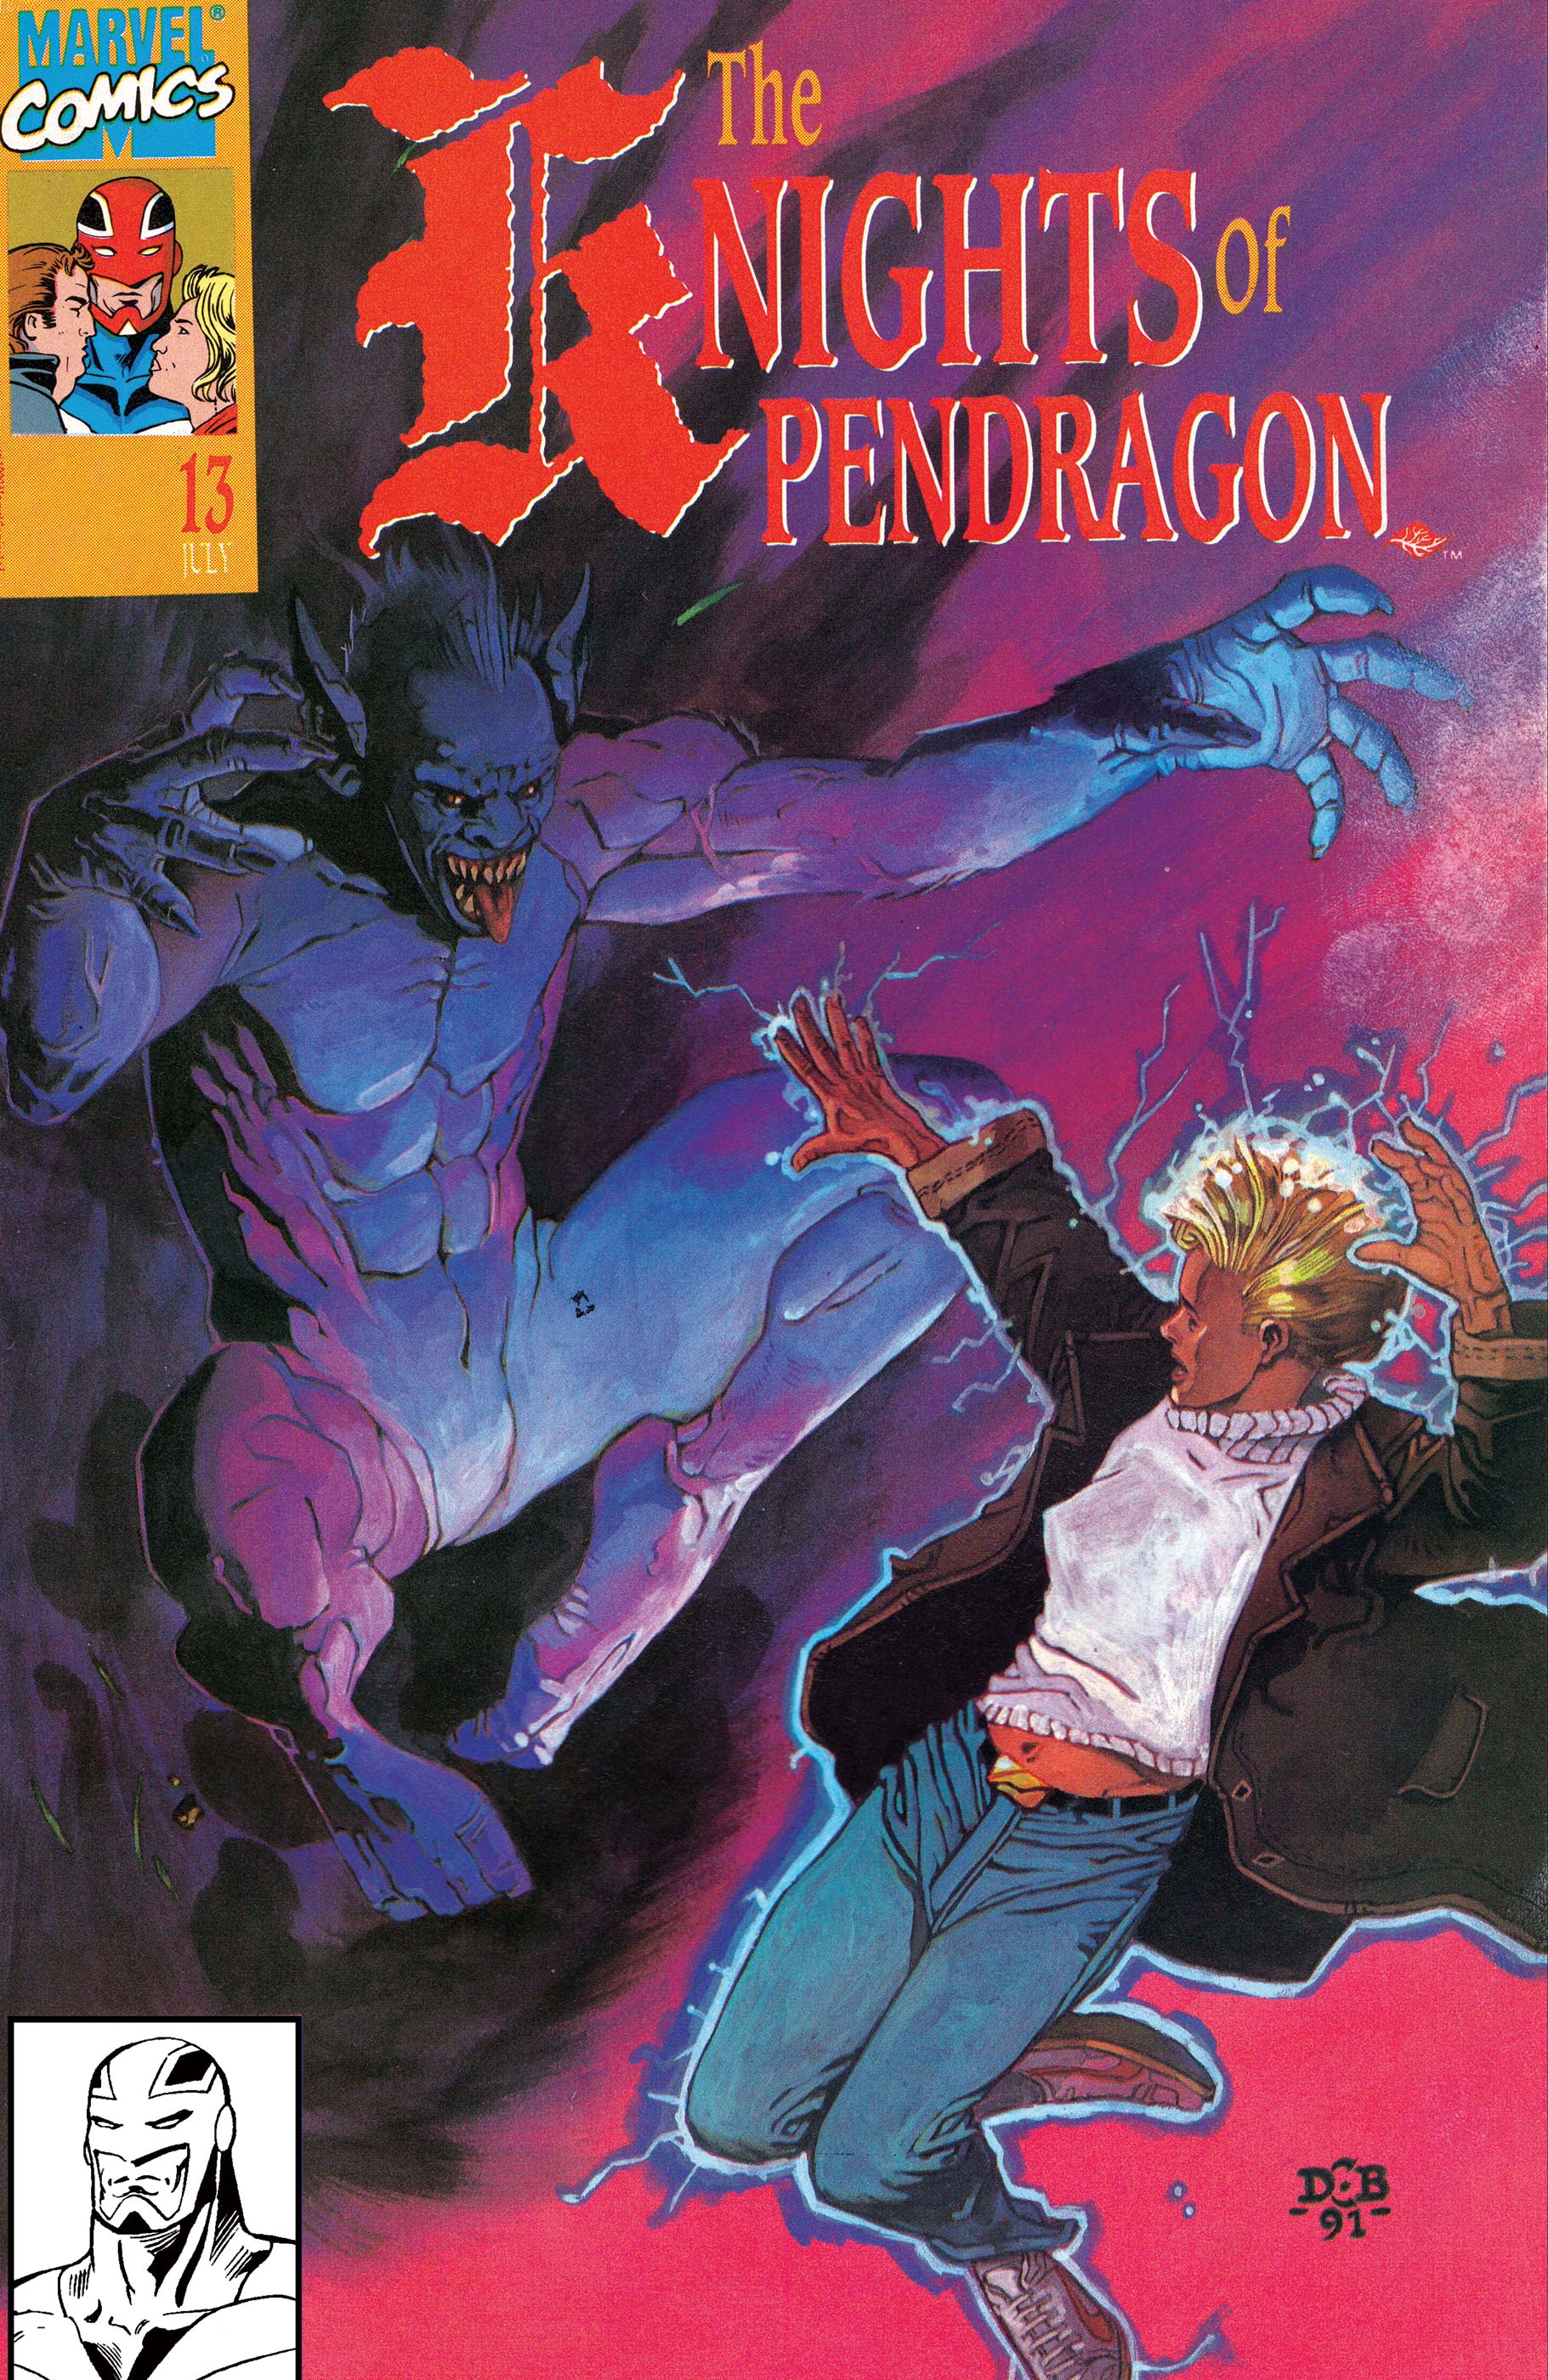 Knights of Pendragon (1990) #13